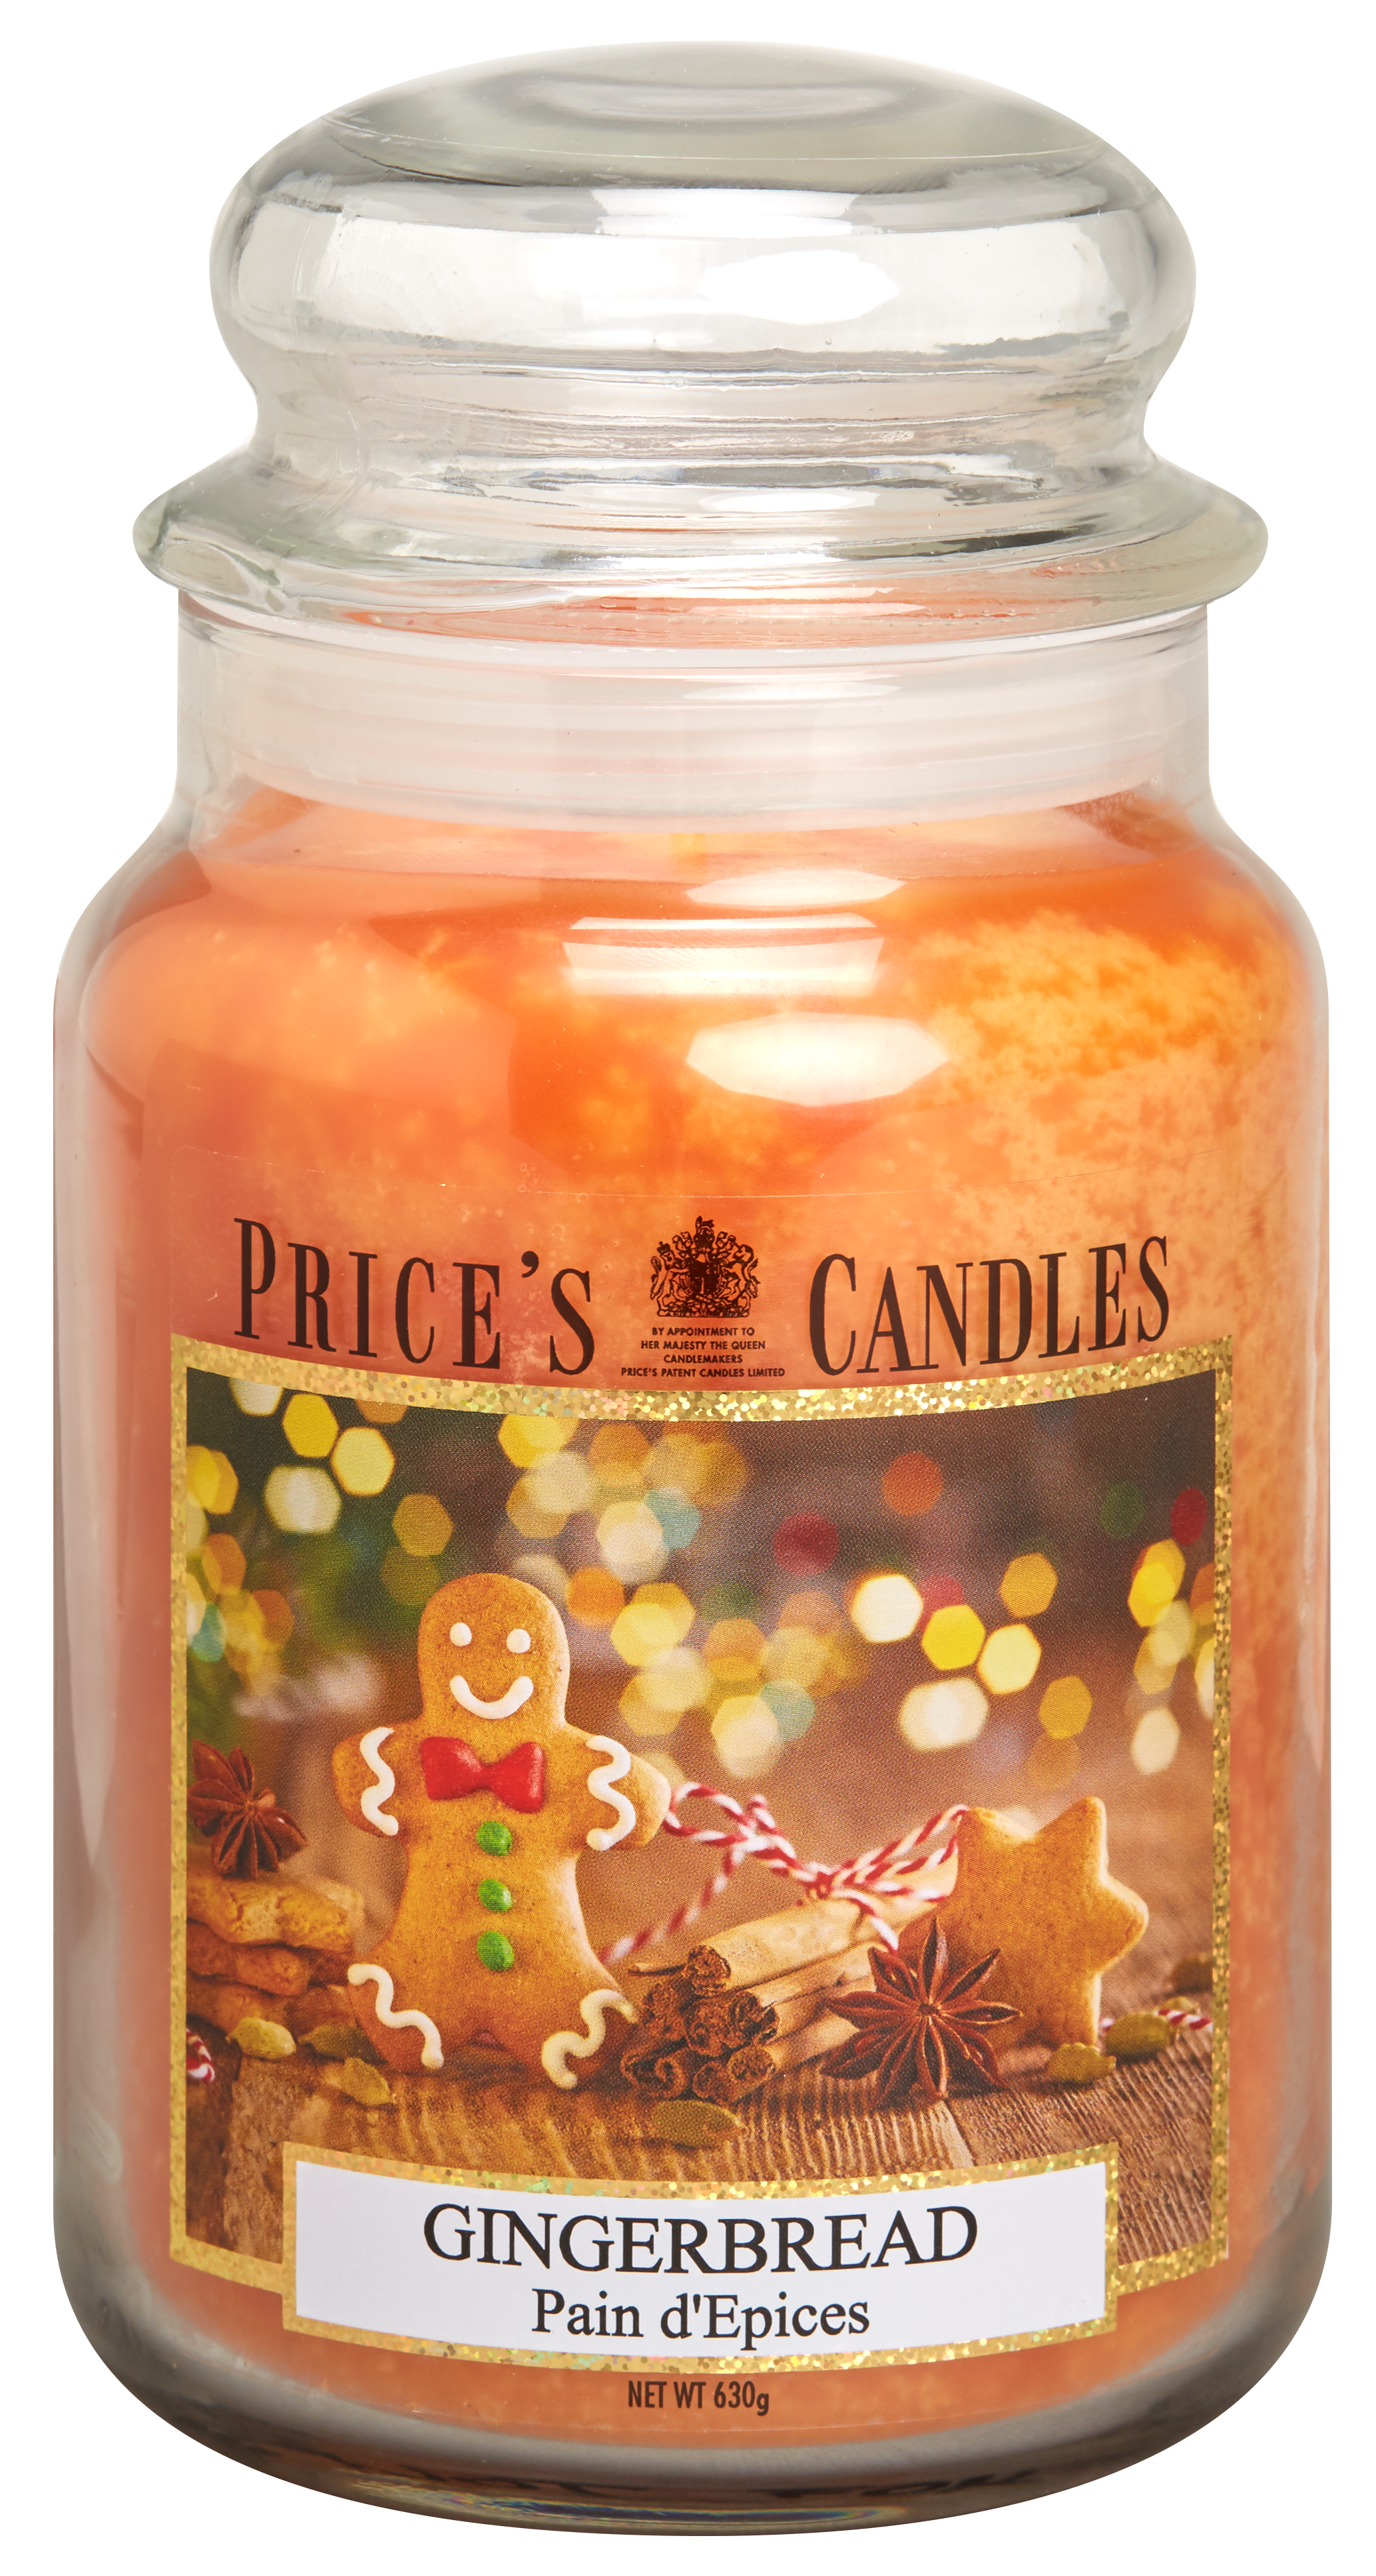 Prices Candle "Gingerbread" 630g  